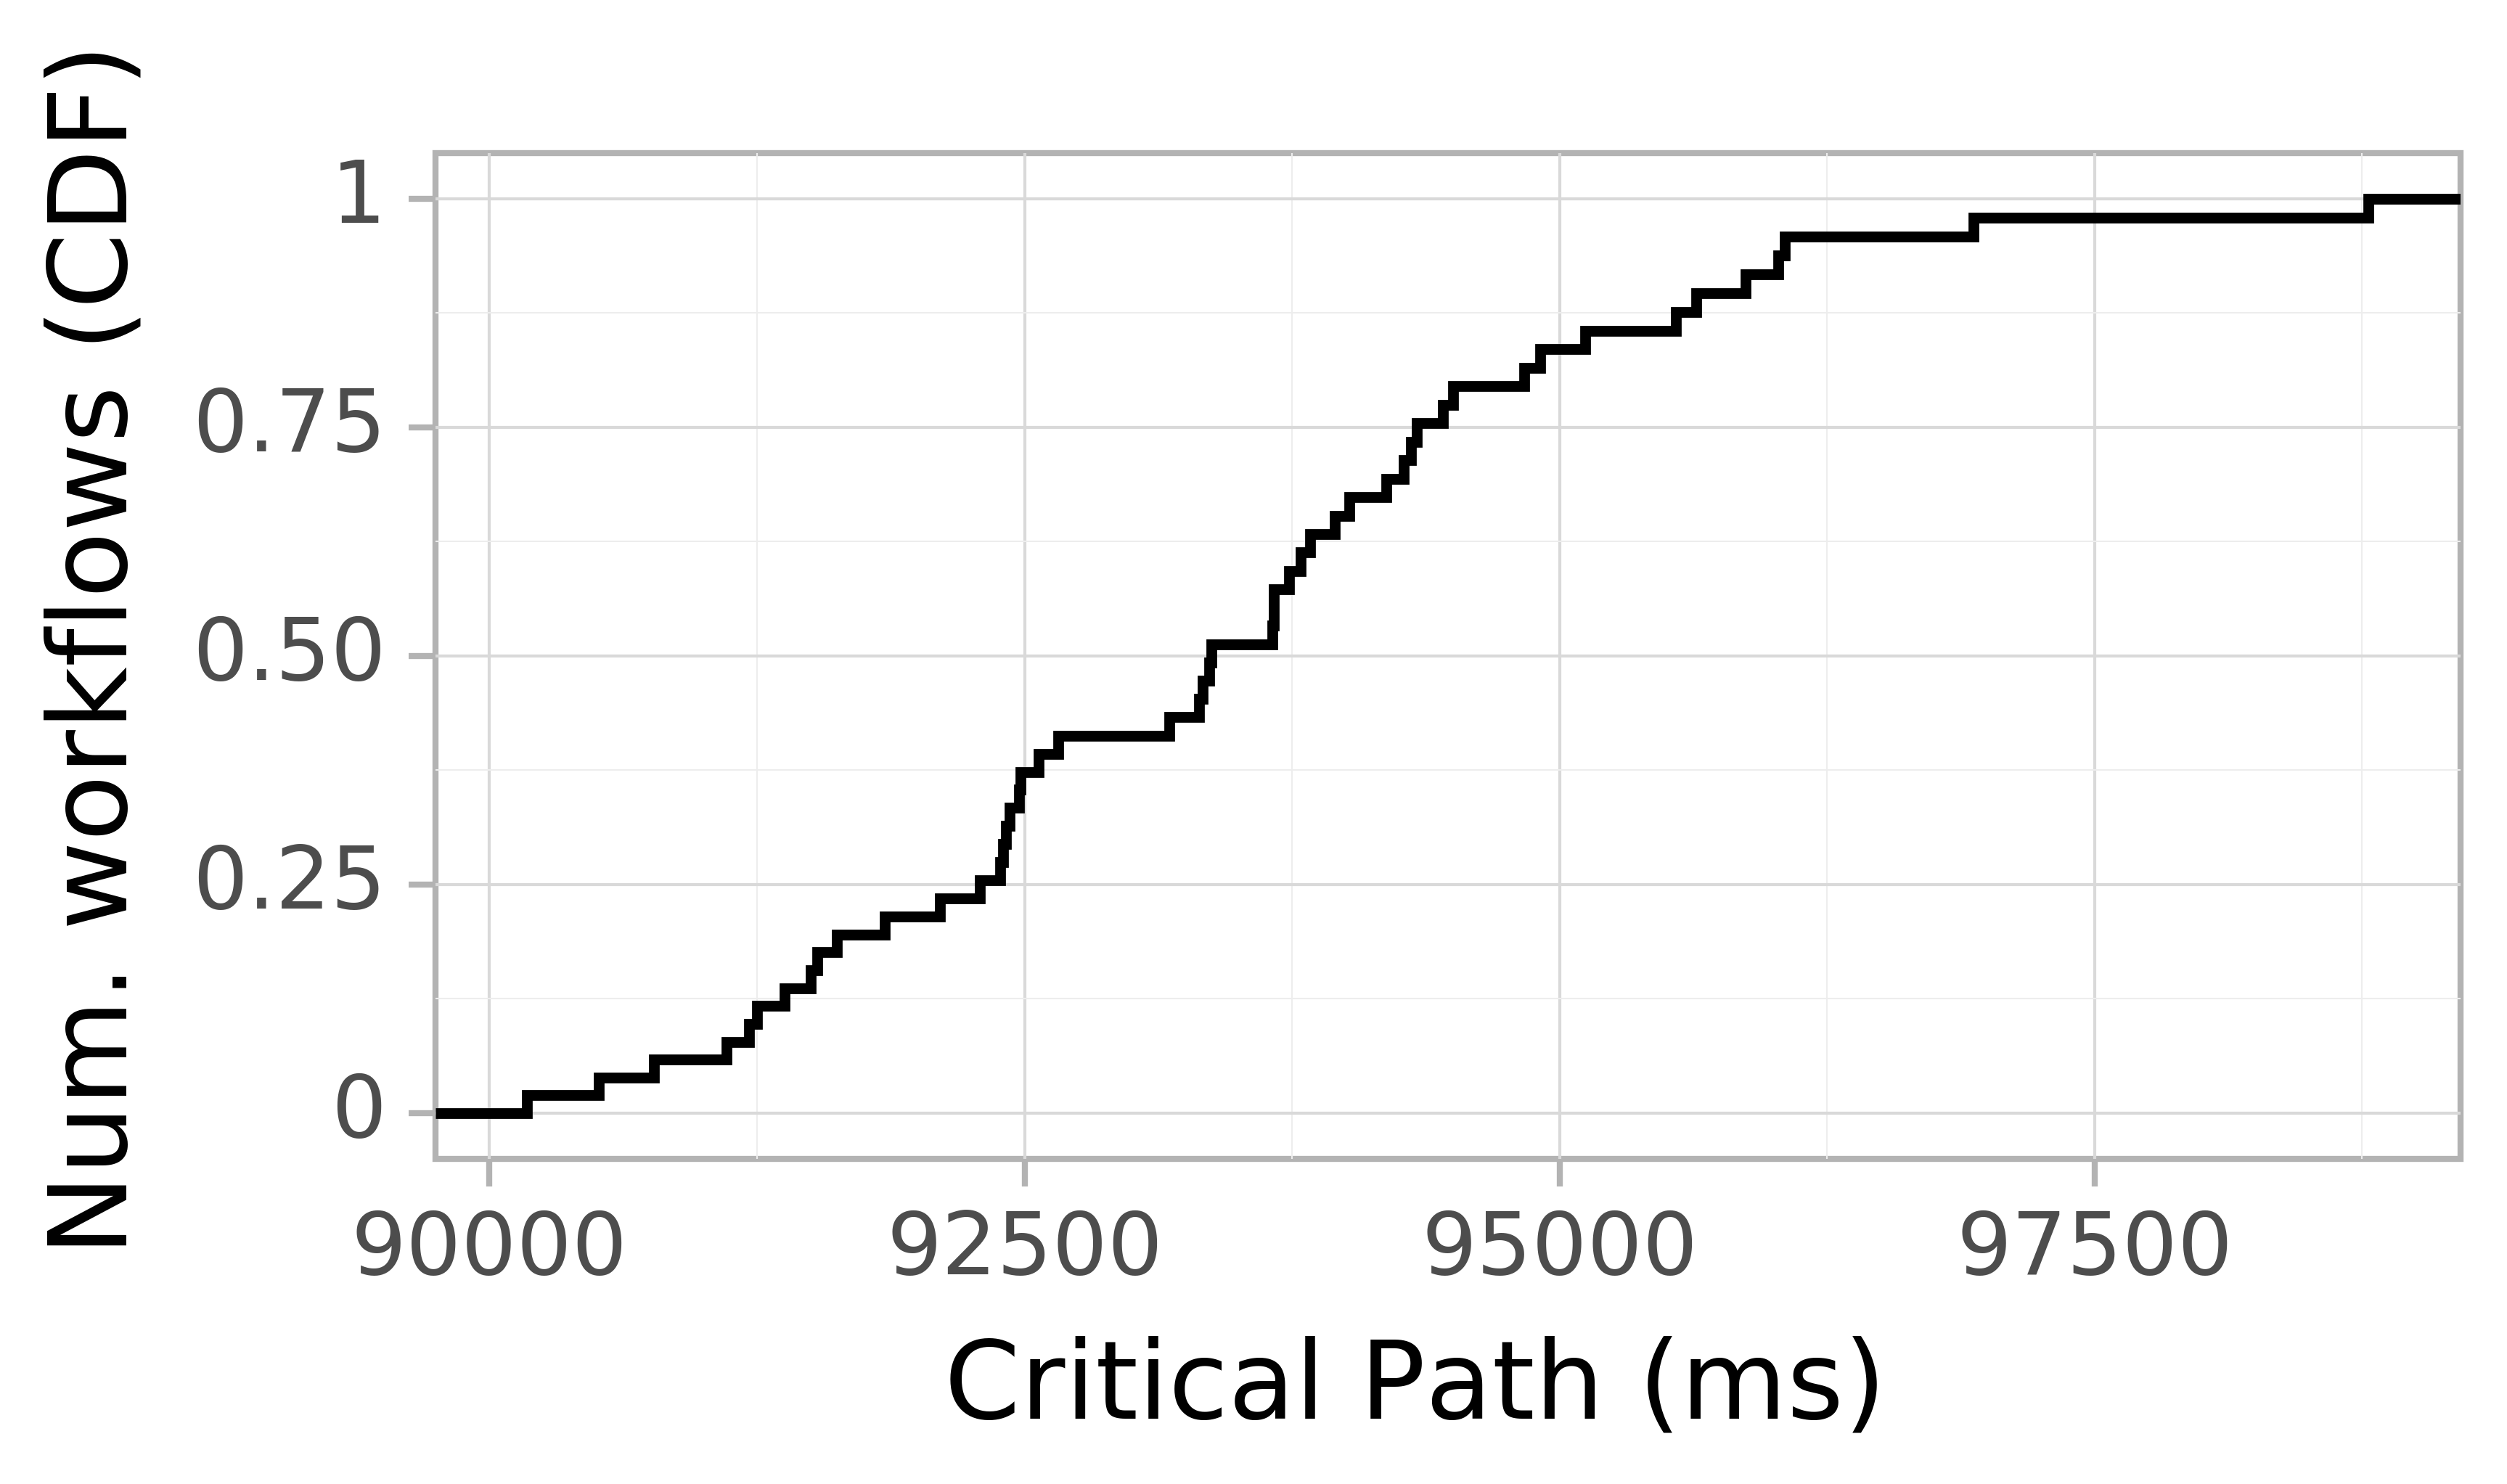 Job runtime CDF graph for the askalon-new_ee42 trace.